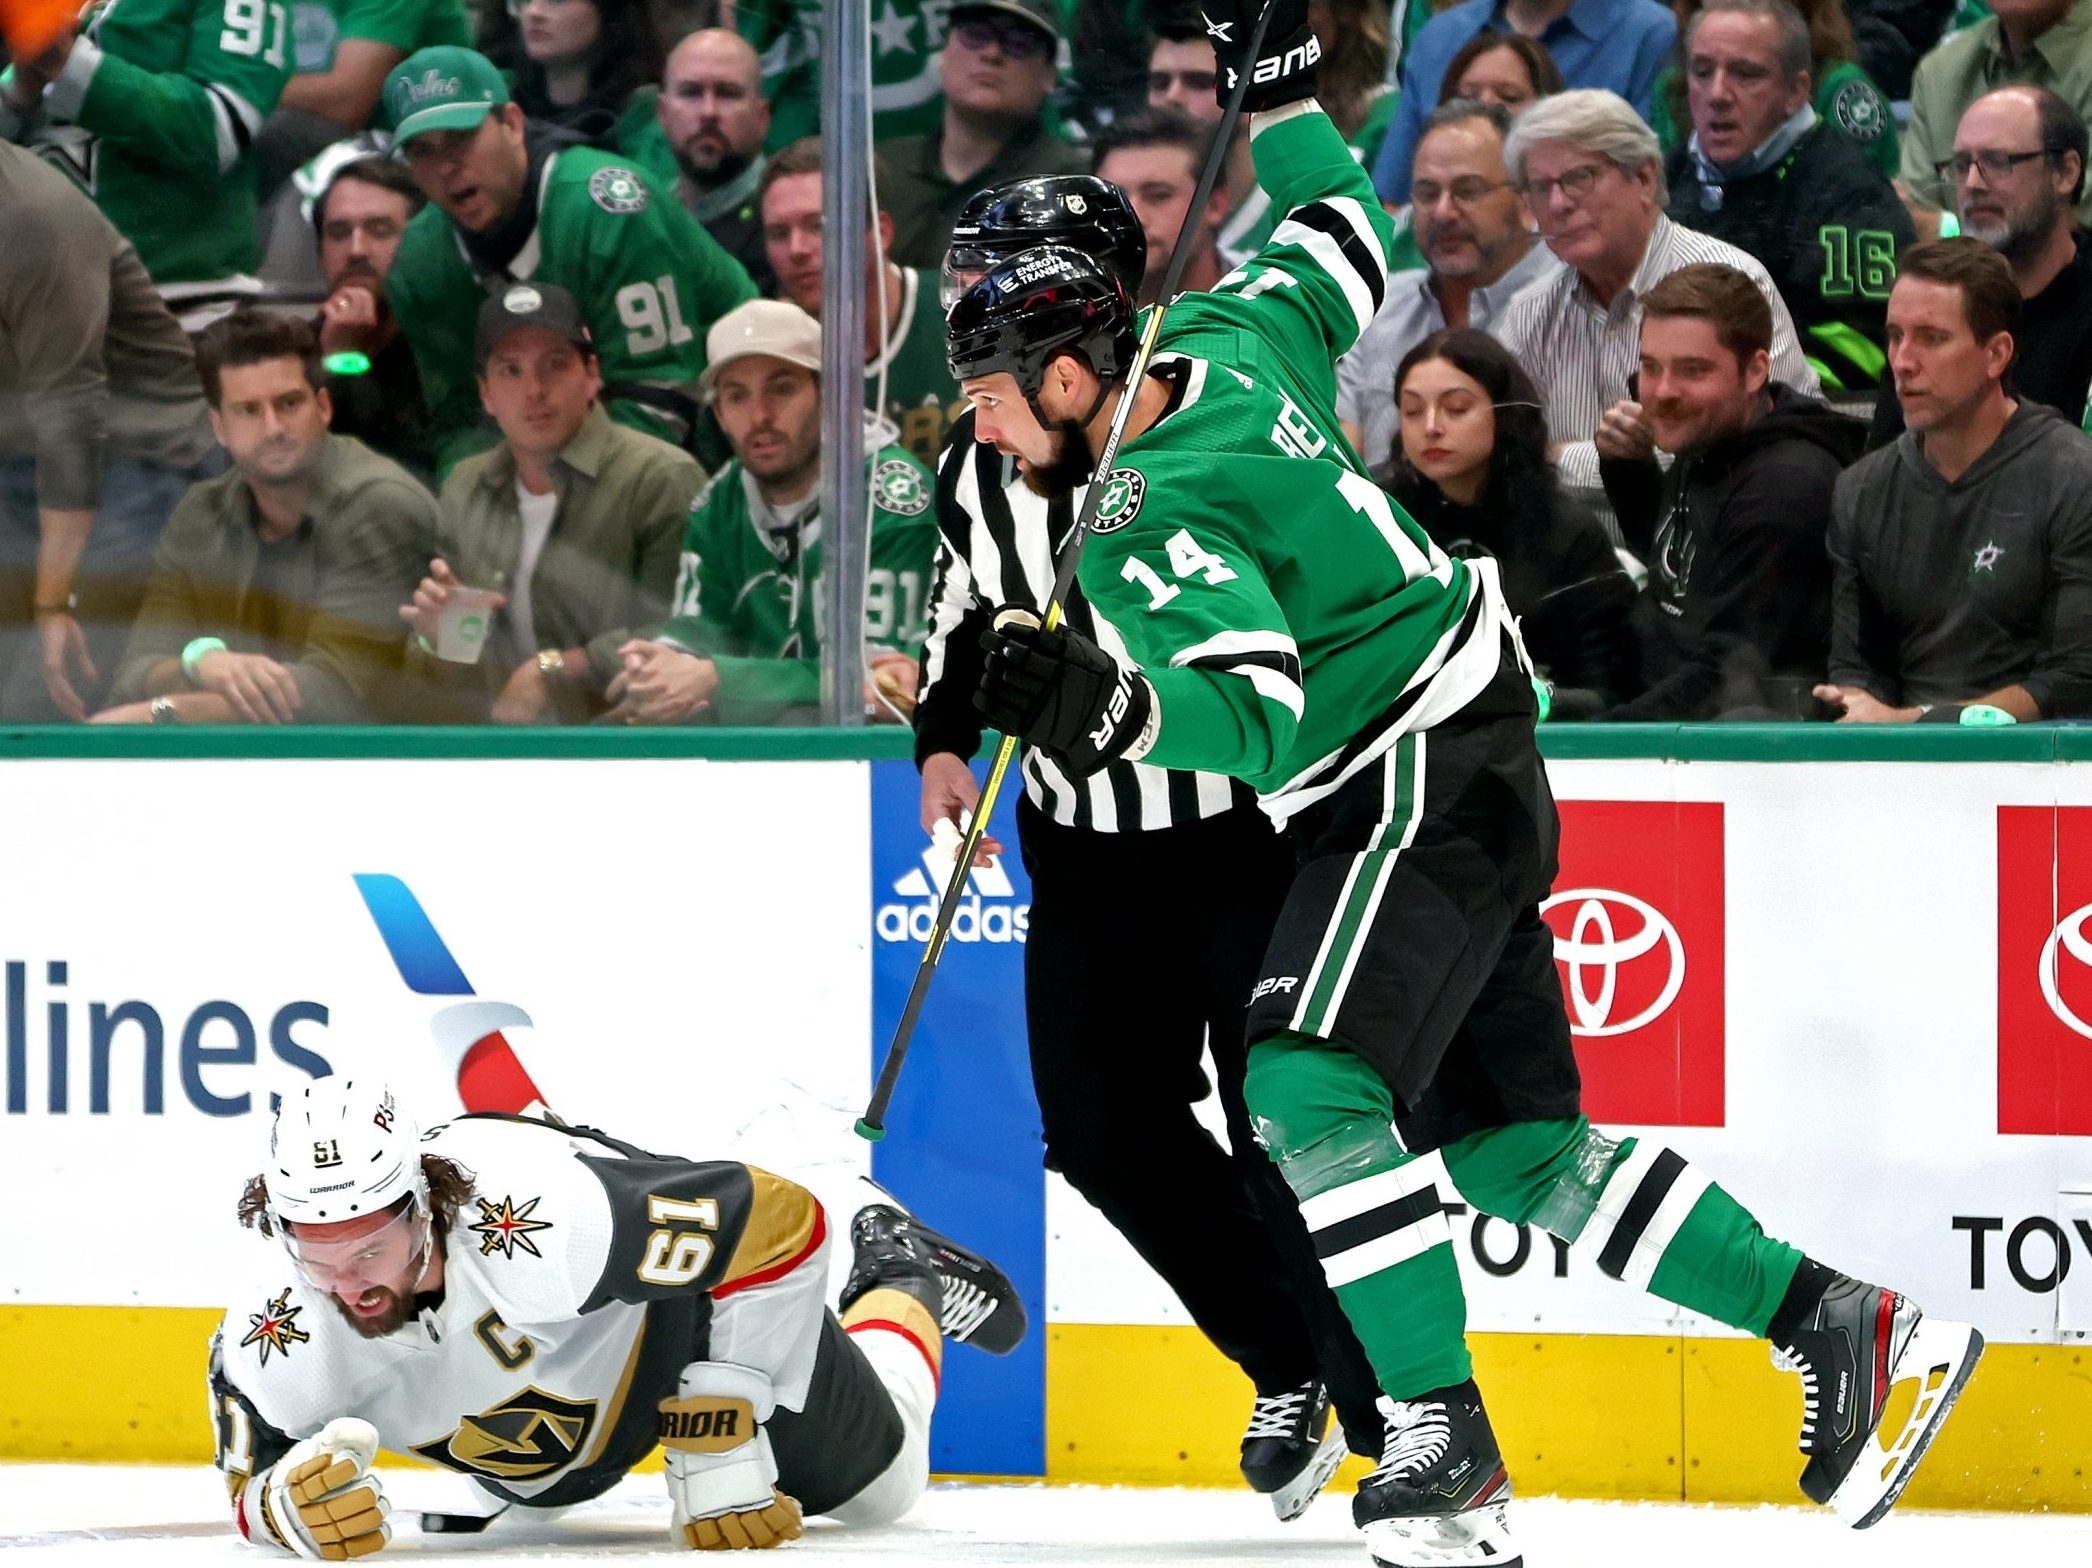 Jamie Benn is forced to sit on a barstool instead of the bench due to  T-Mobile arena's bench layout. : r/hockey